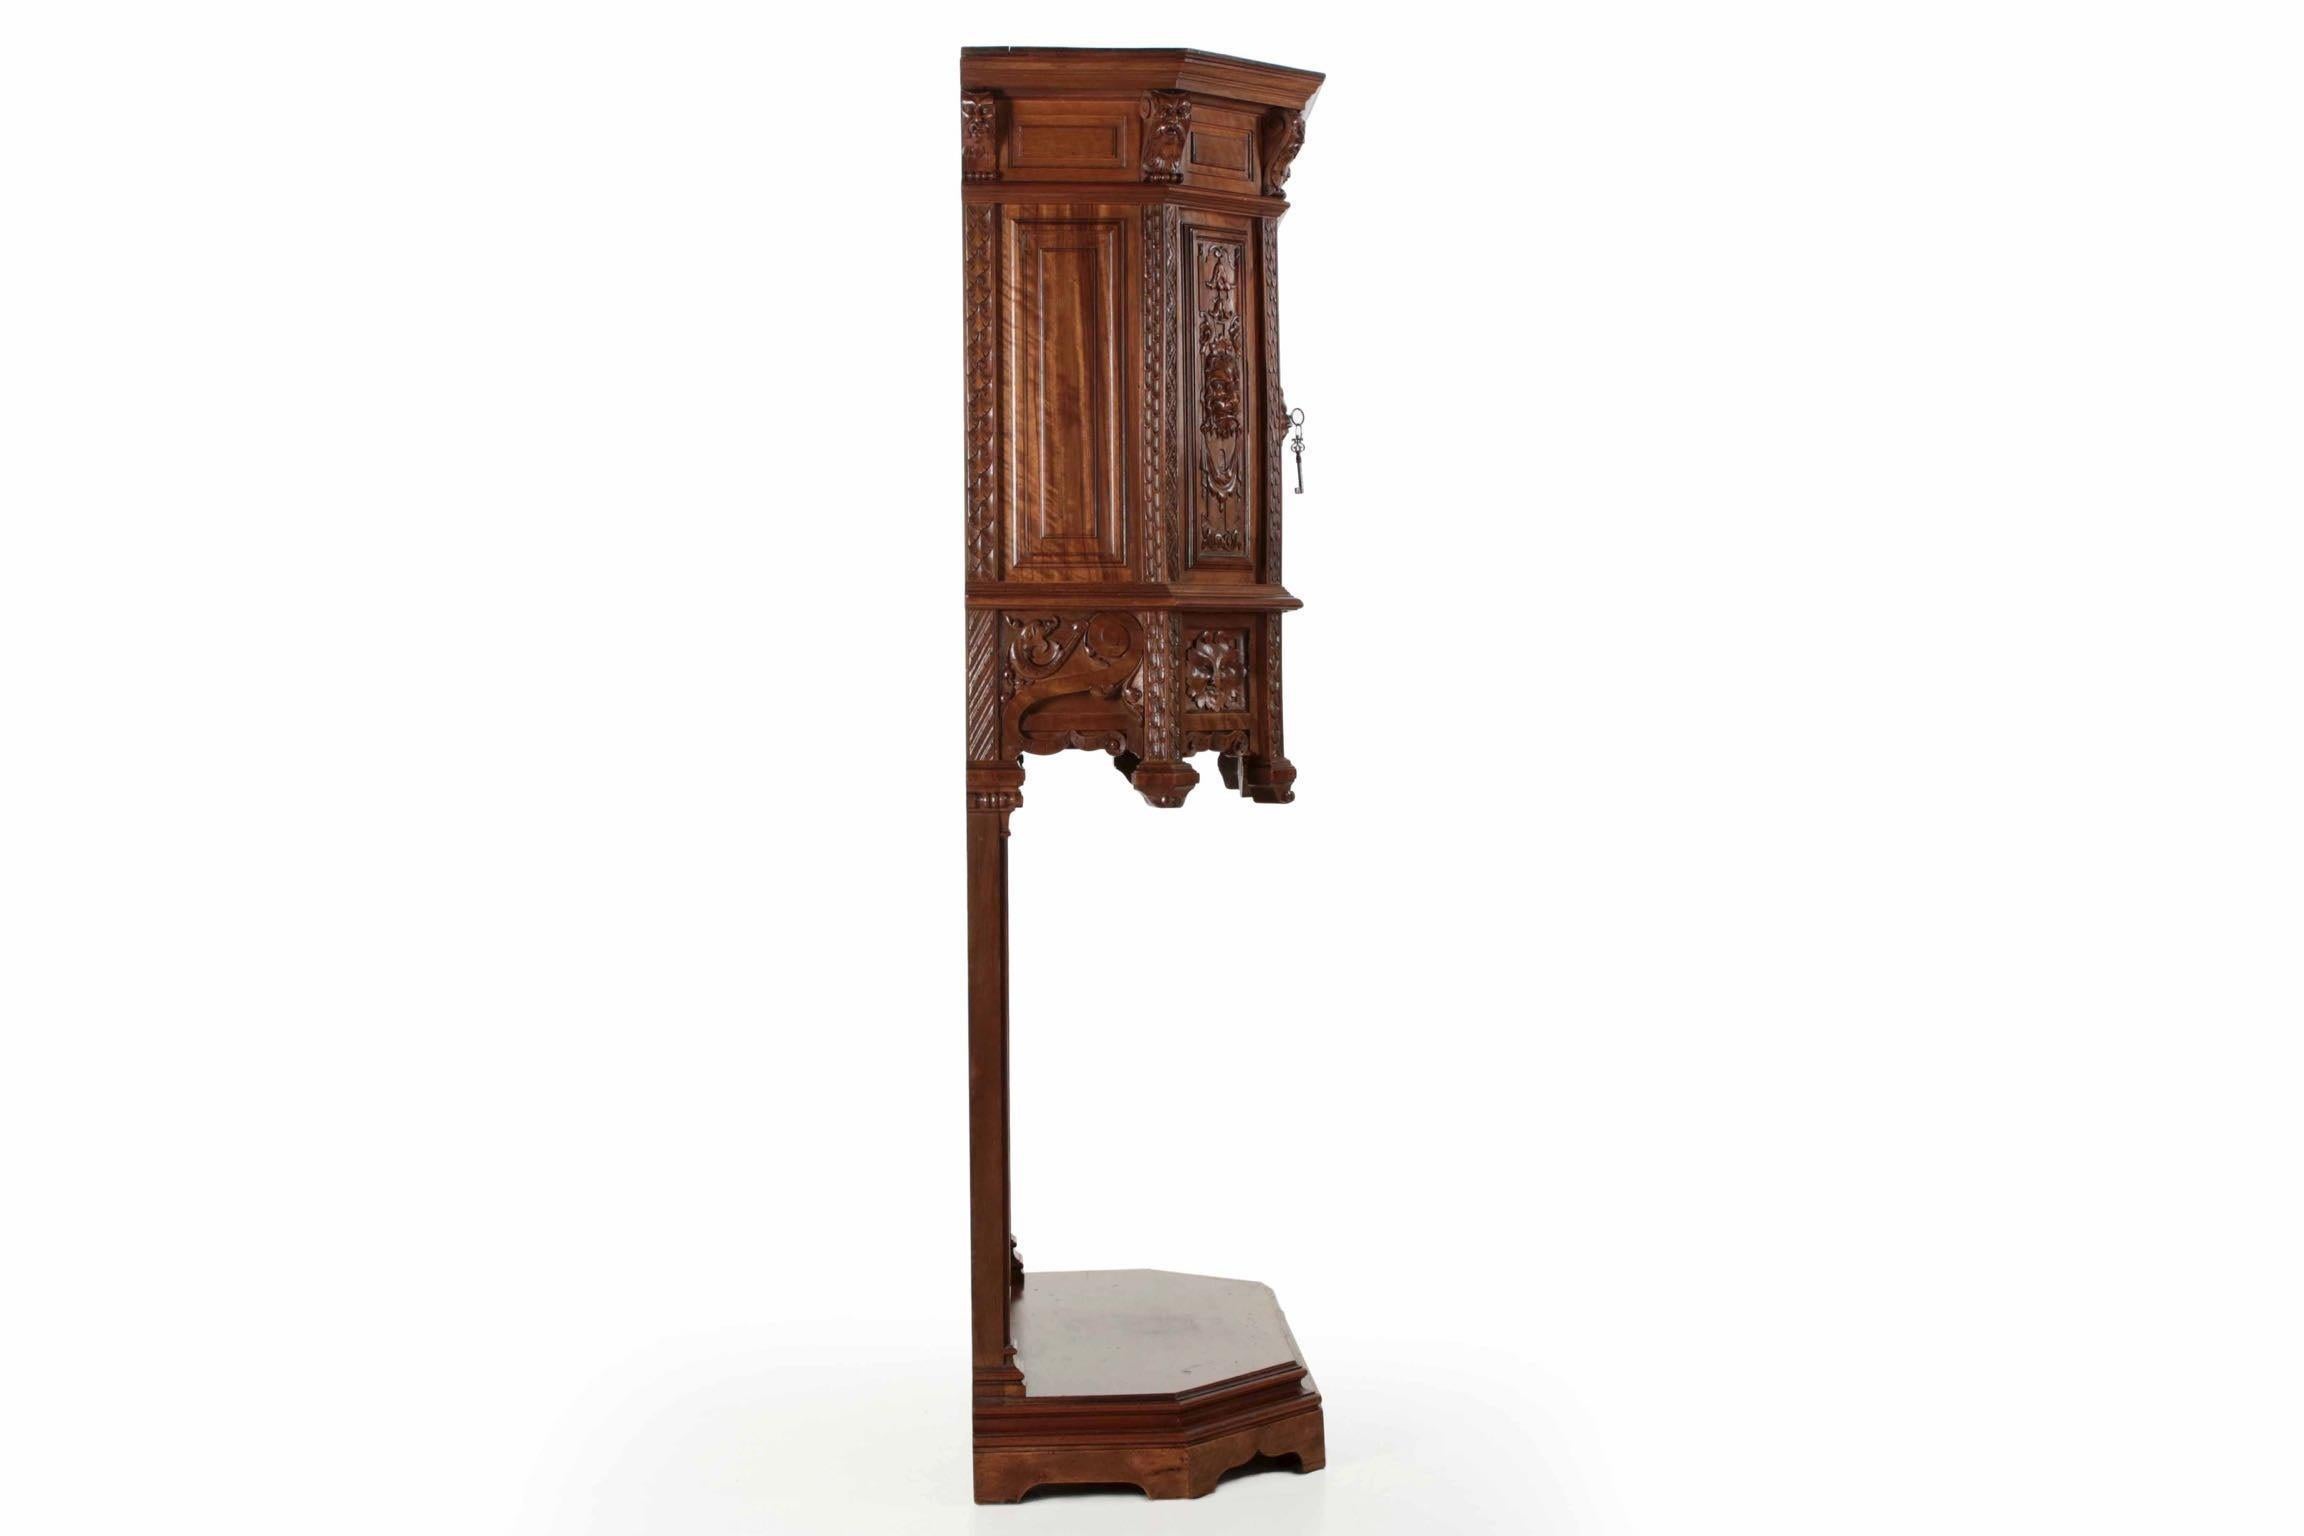 French Gothic Revival Carved Walnut Antique Cupboard Cabinet, circa 1880 In Good Condition For Sale In Shippensburg, PA